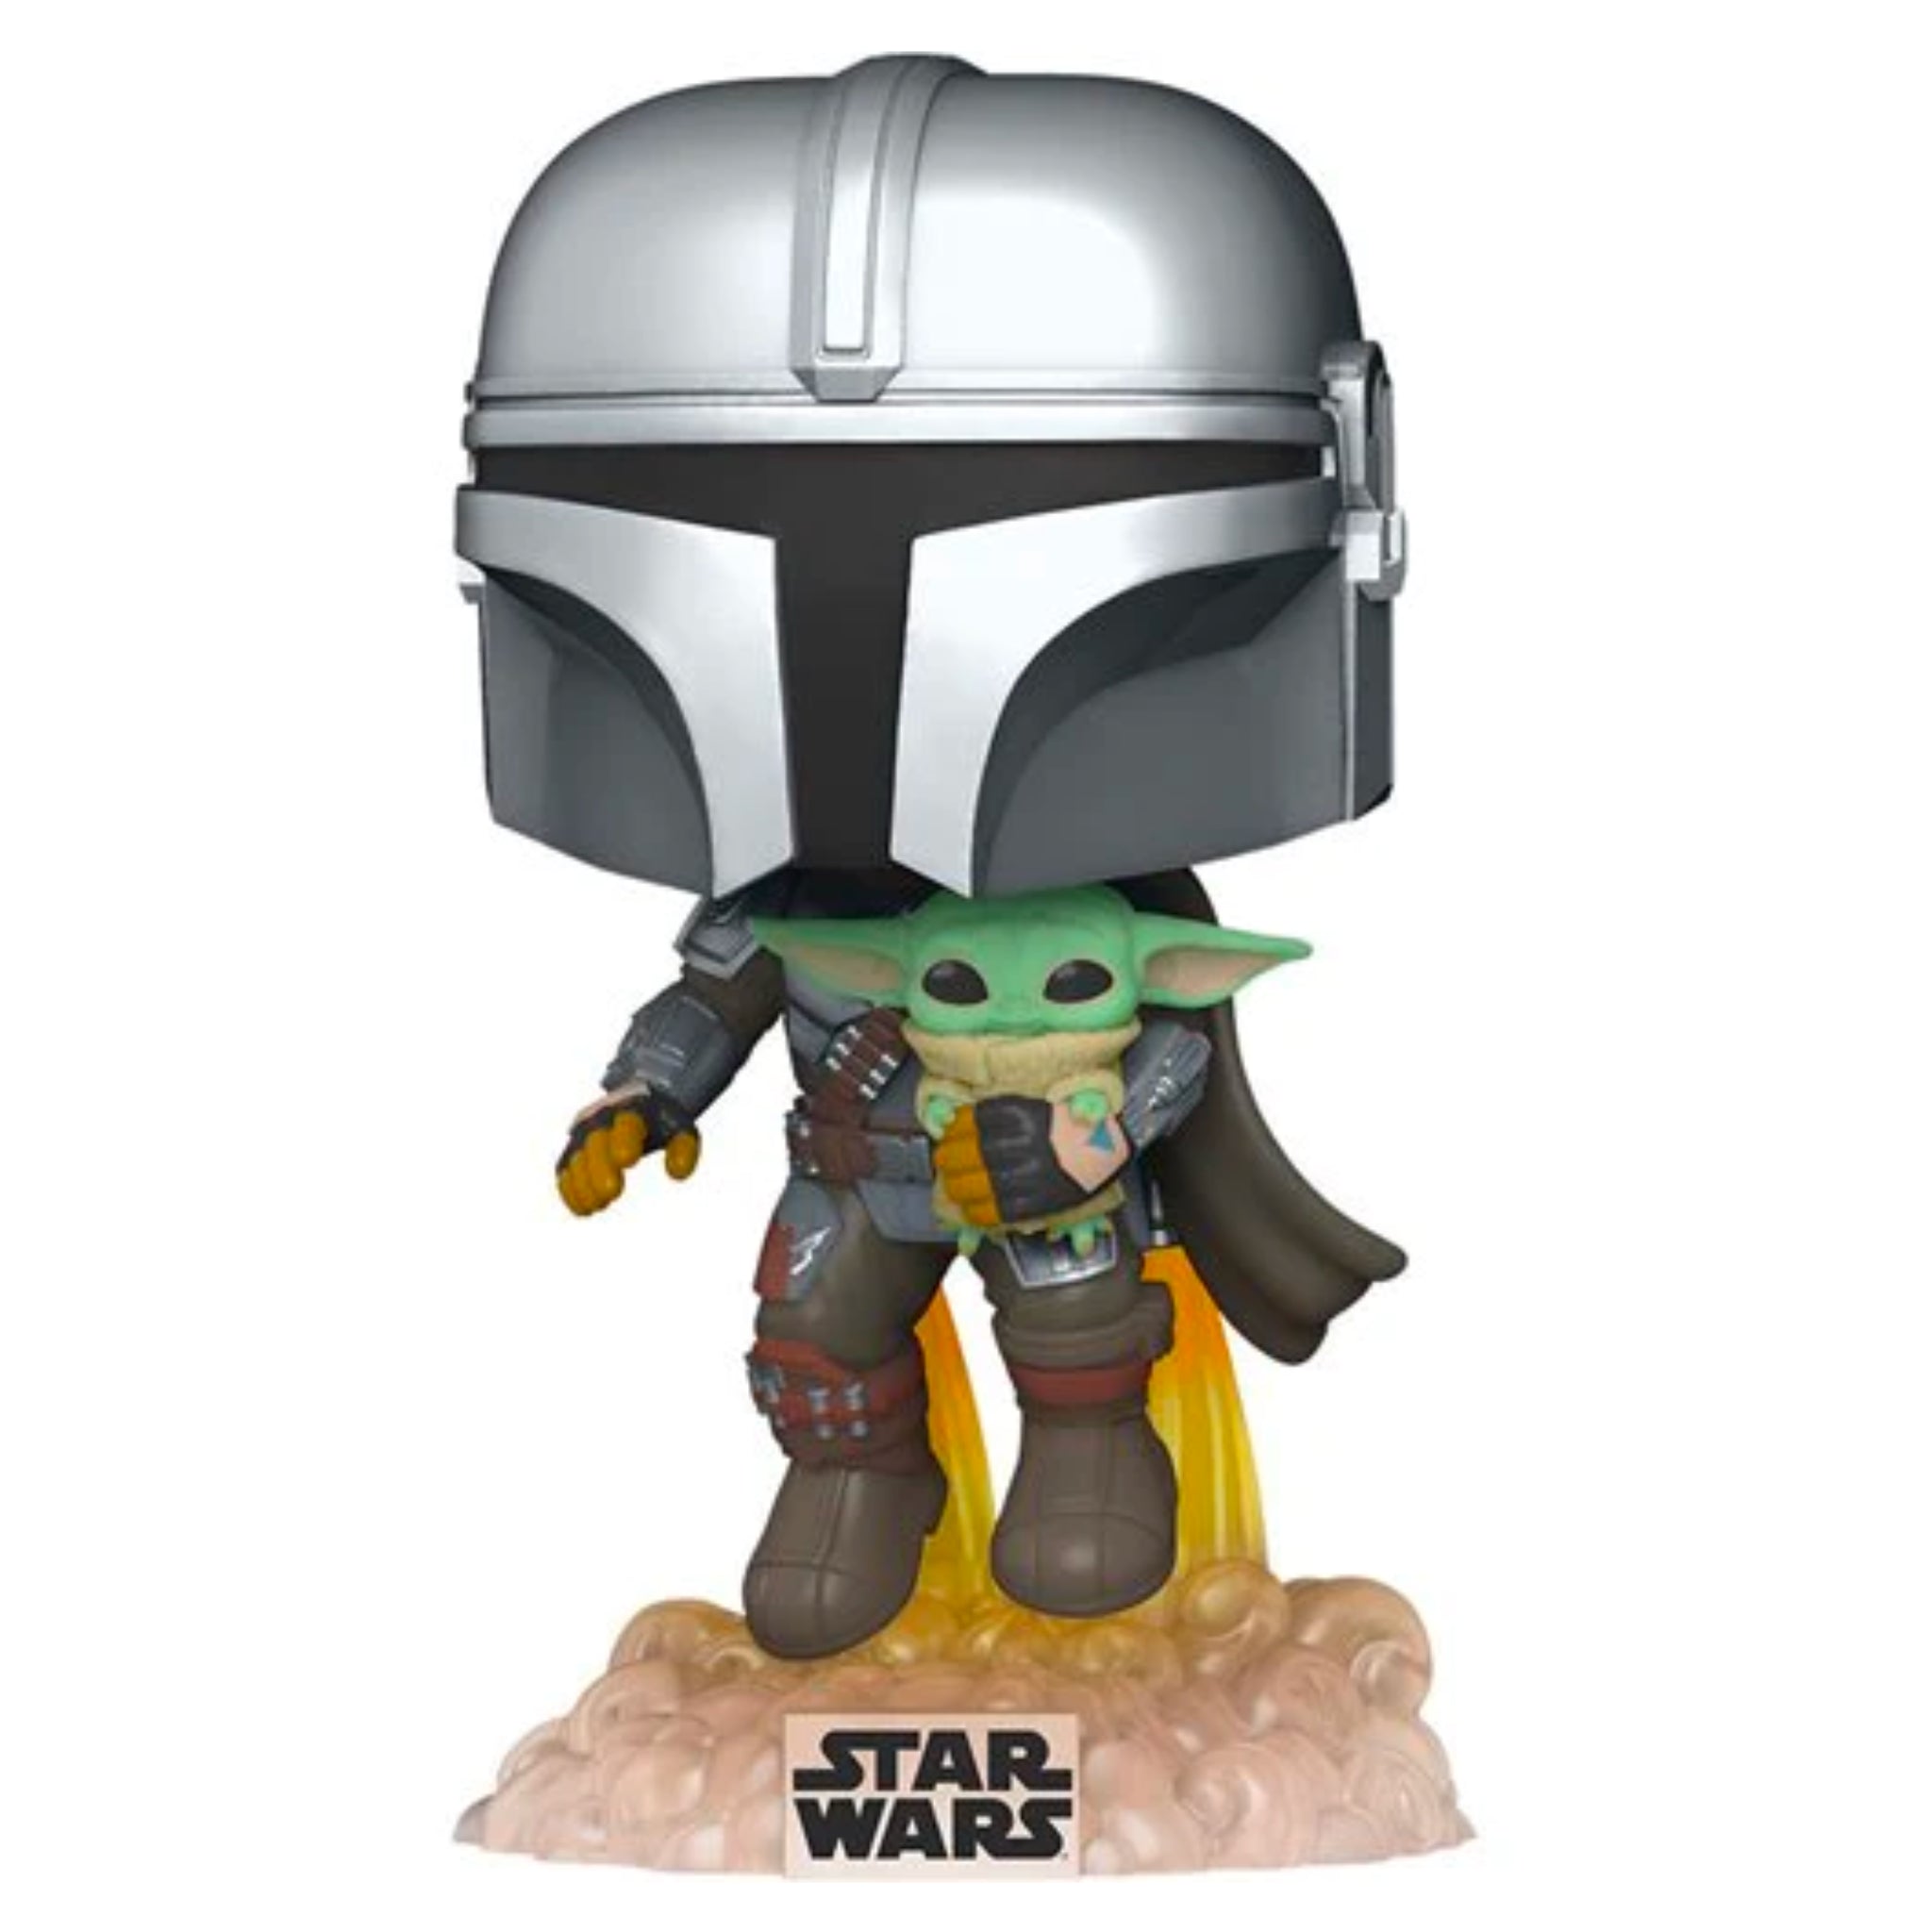 The Mandalorian with The Child Funko Pop!